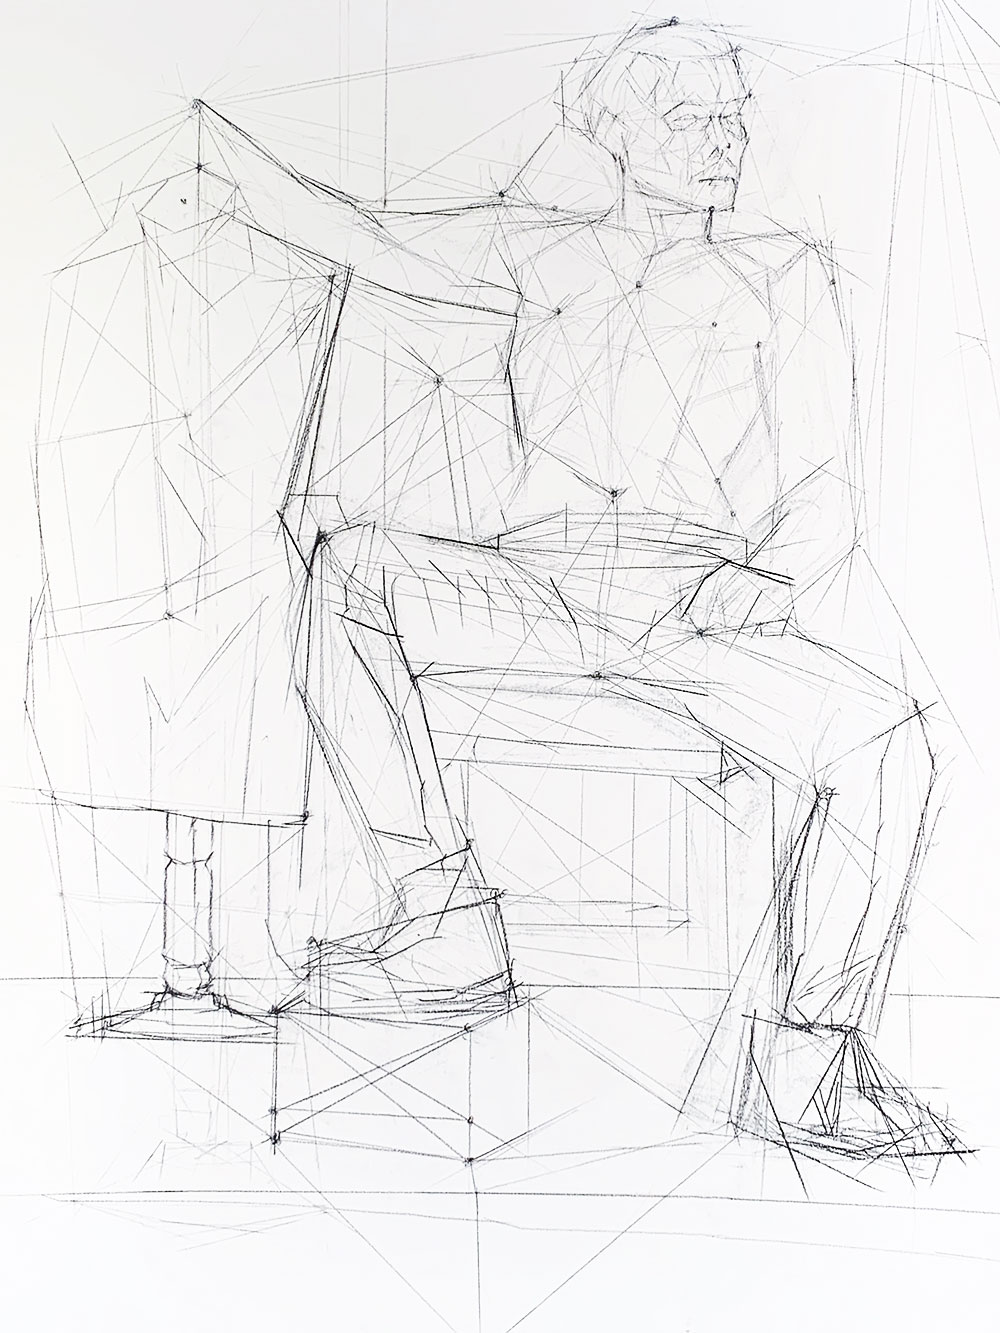 A self portrait composed of several lines, outlining the gesture figure of a human- including angles, proportions, and spatial relationships, drawn in vine charcoal.